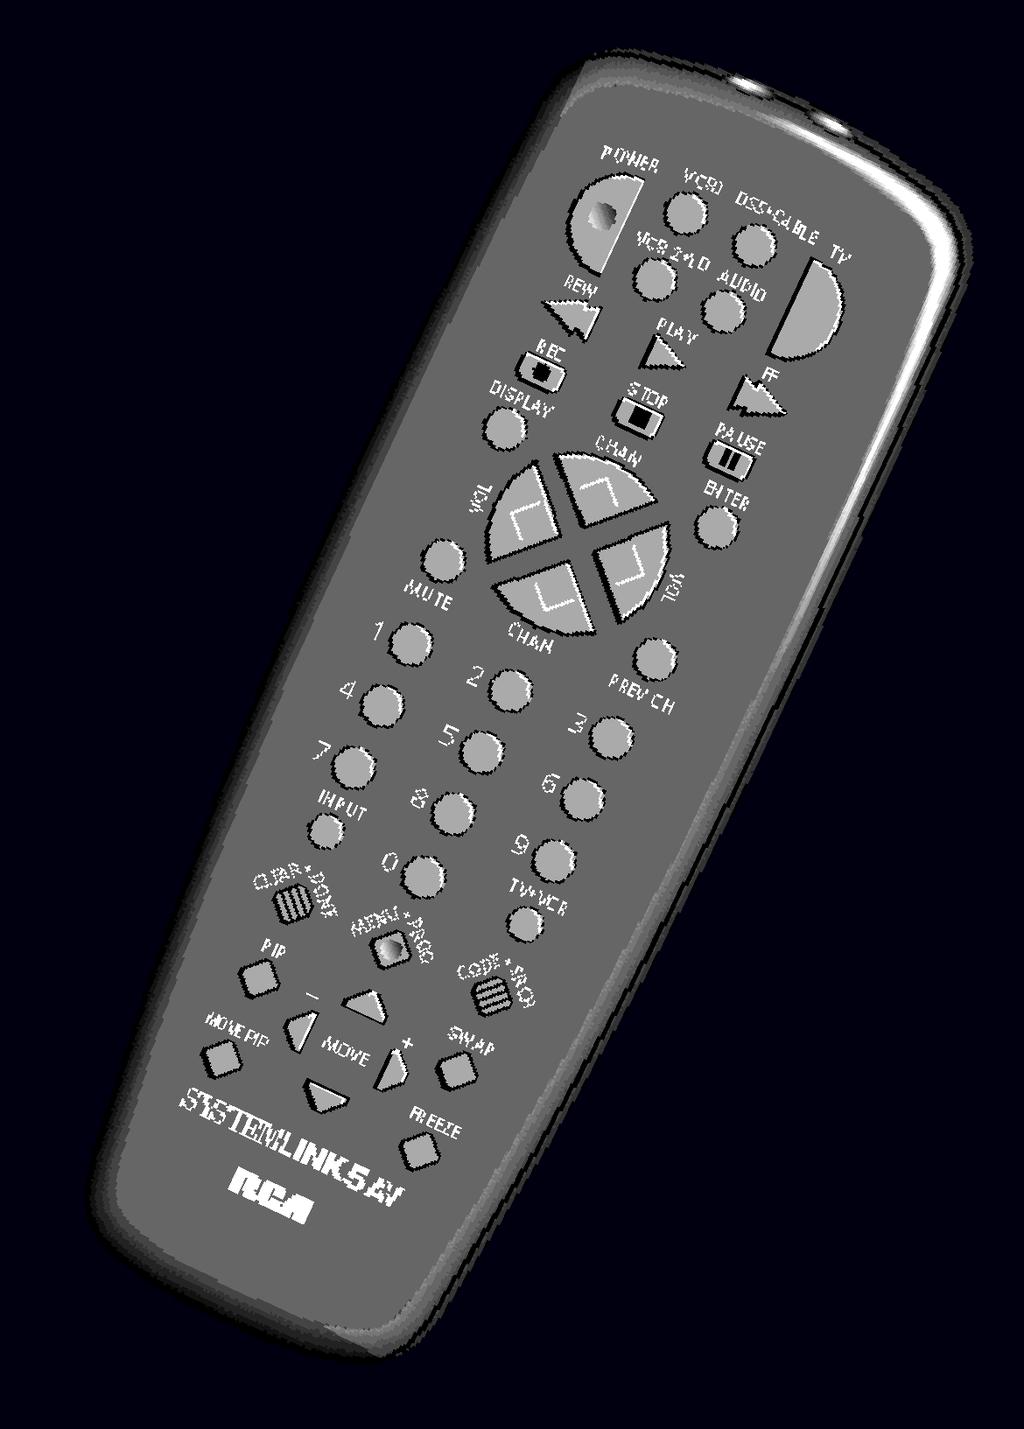 TRCU500 Universal Remote Control TABLE OF CONTENTS This Universal Remote Control is compatible with most models of infrared controlled Televisions, VCRs, Cable Boxes, Satellite Receivers, and Audio